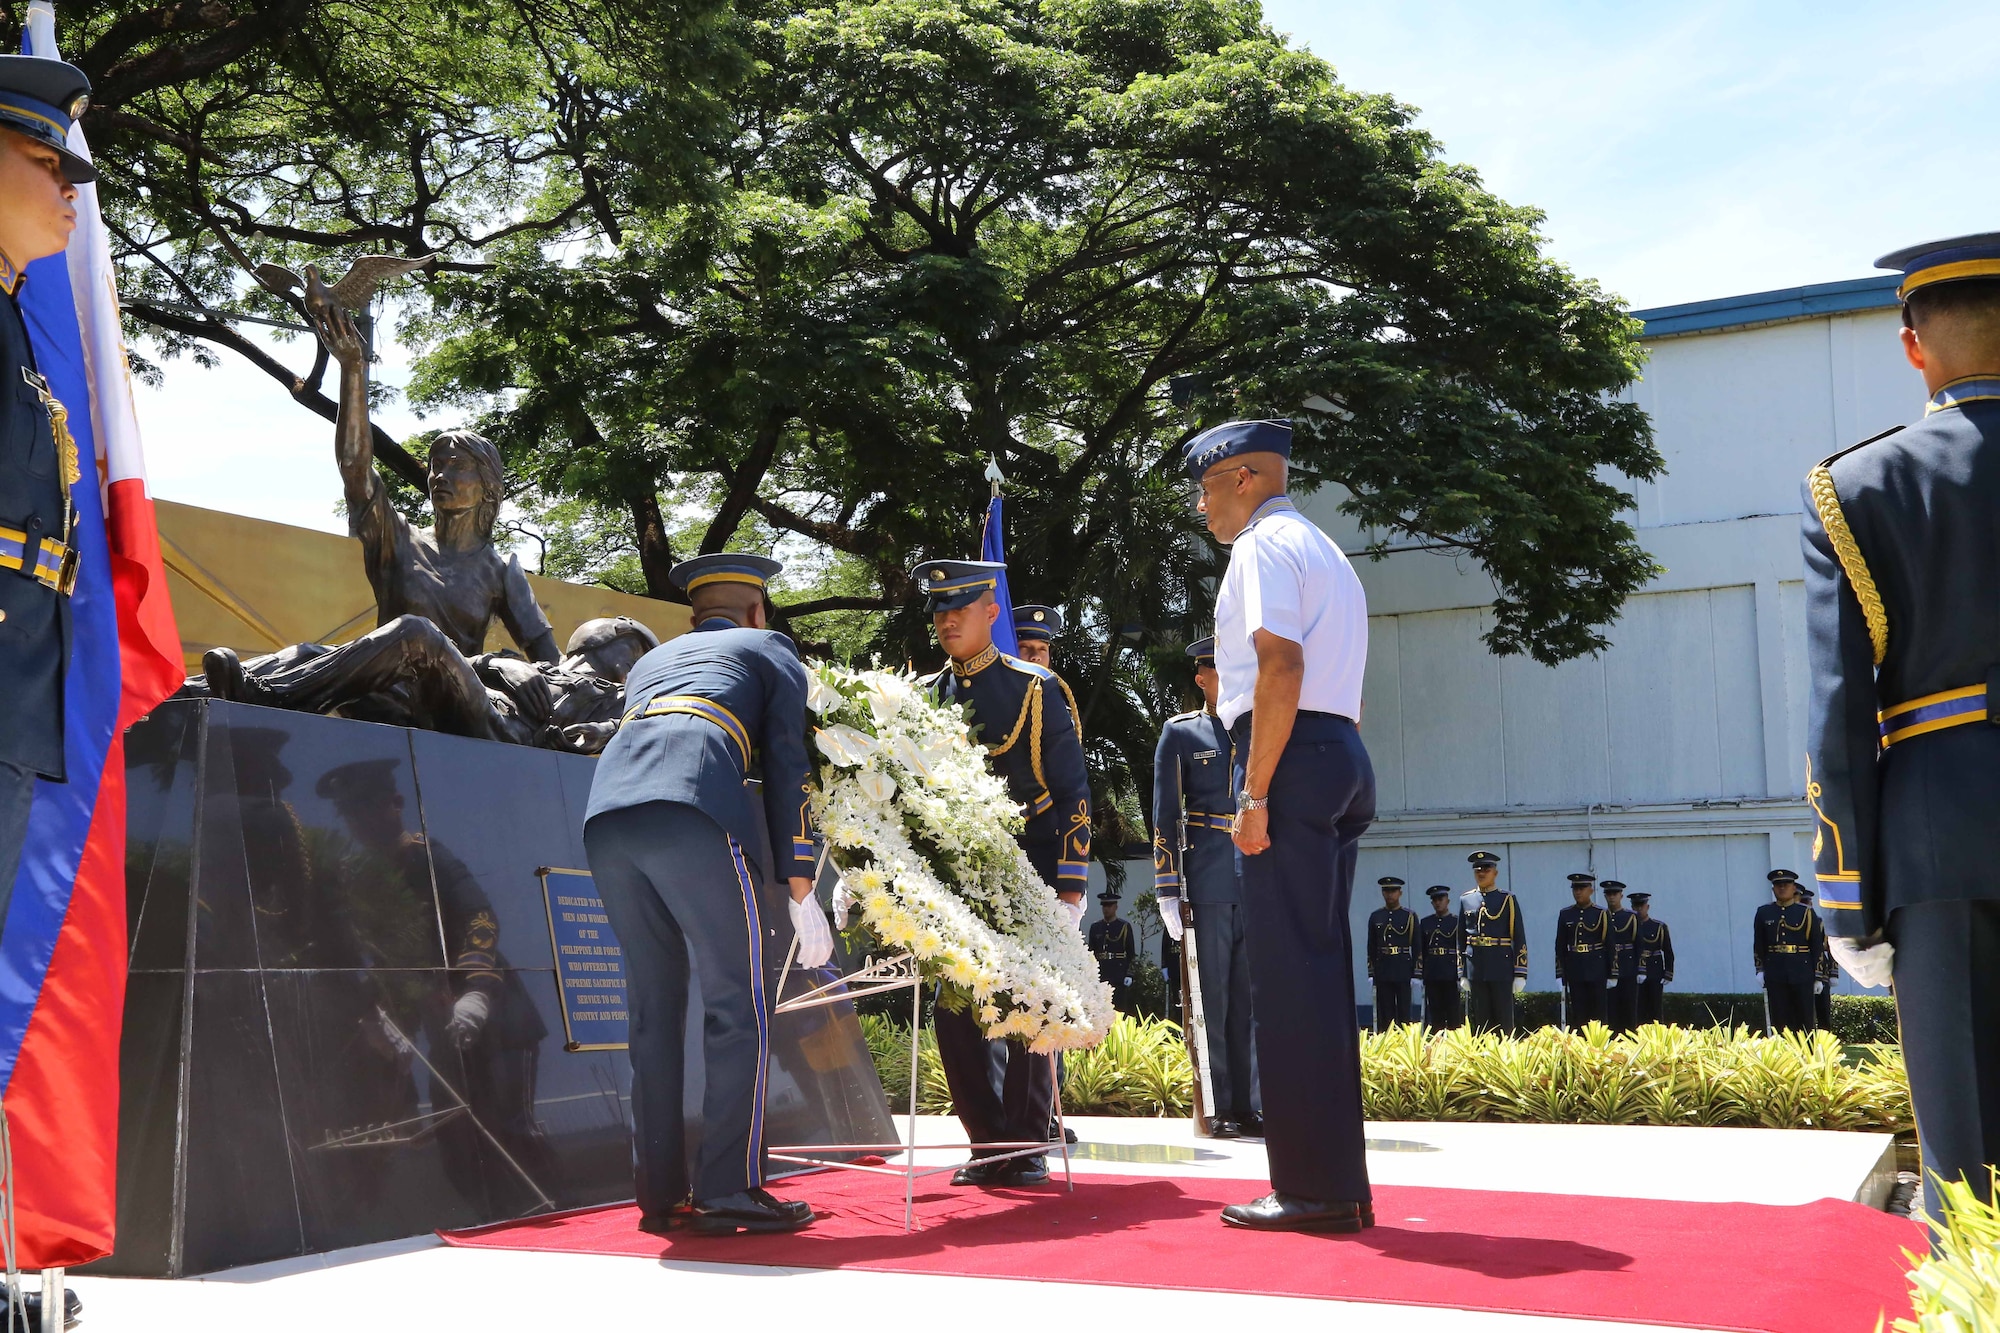 Gen. CQ Brown, Jr., Pacific Air Forces commander, participates in an honor guard and wreath-laying ceremony at the Monument of the Fallen Airmen at the Philippines Air Force (PAF) headquarters on Villamor Air Base, Philippines, May 16, 2019.  Brown met with PAF Commanding General Lt. Gen. Rozzano Briguez as well as other key leaders during his-three day visit to showcase U.S. commitment to the long-standing alliance and discuss opportunities to enhance interoperability and capability between the two air forces.